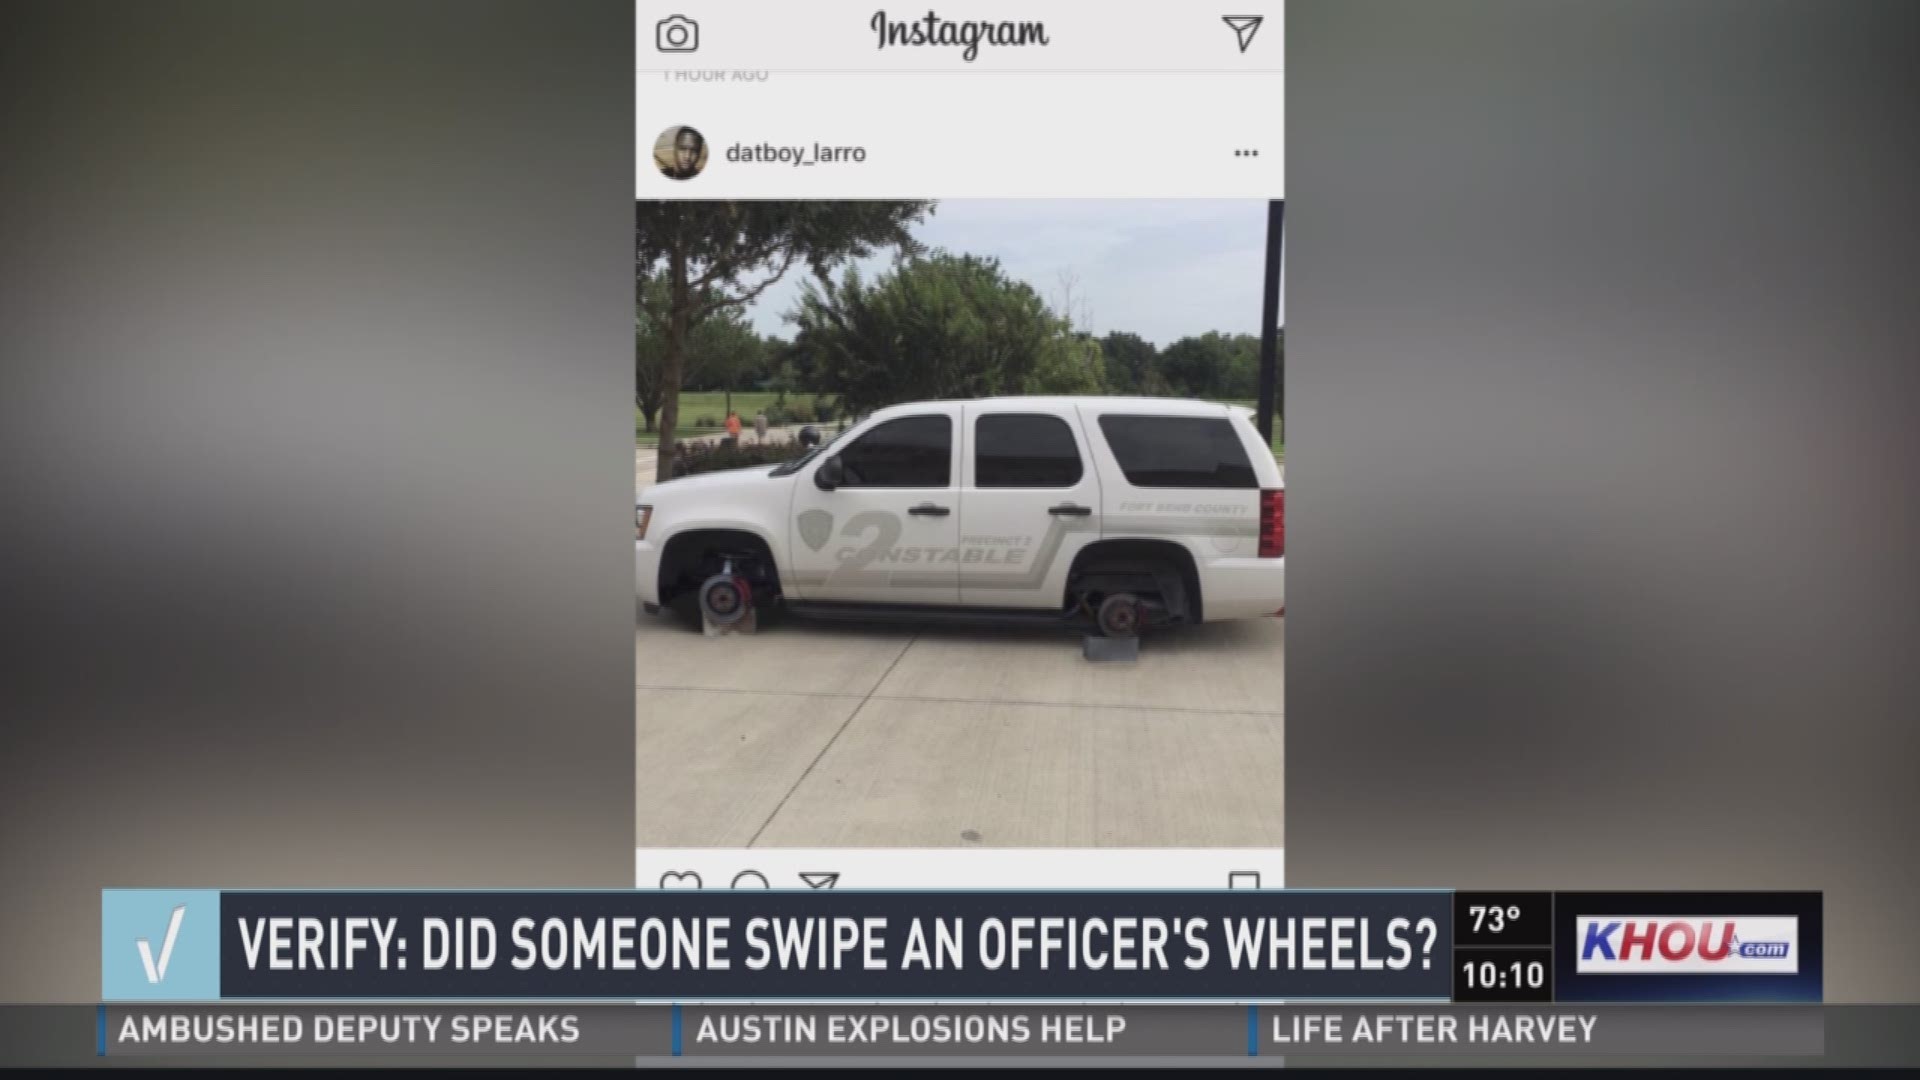 A photo showing a constable patrol's car with cinder blocks popped up on social media. But is it real? Our Verify team takes a look.